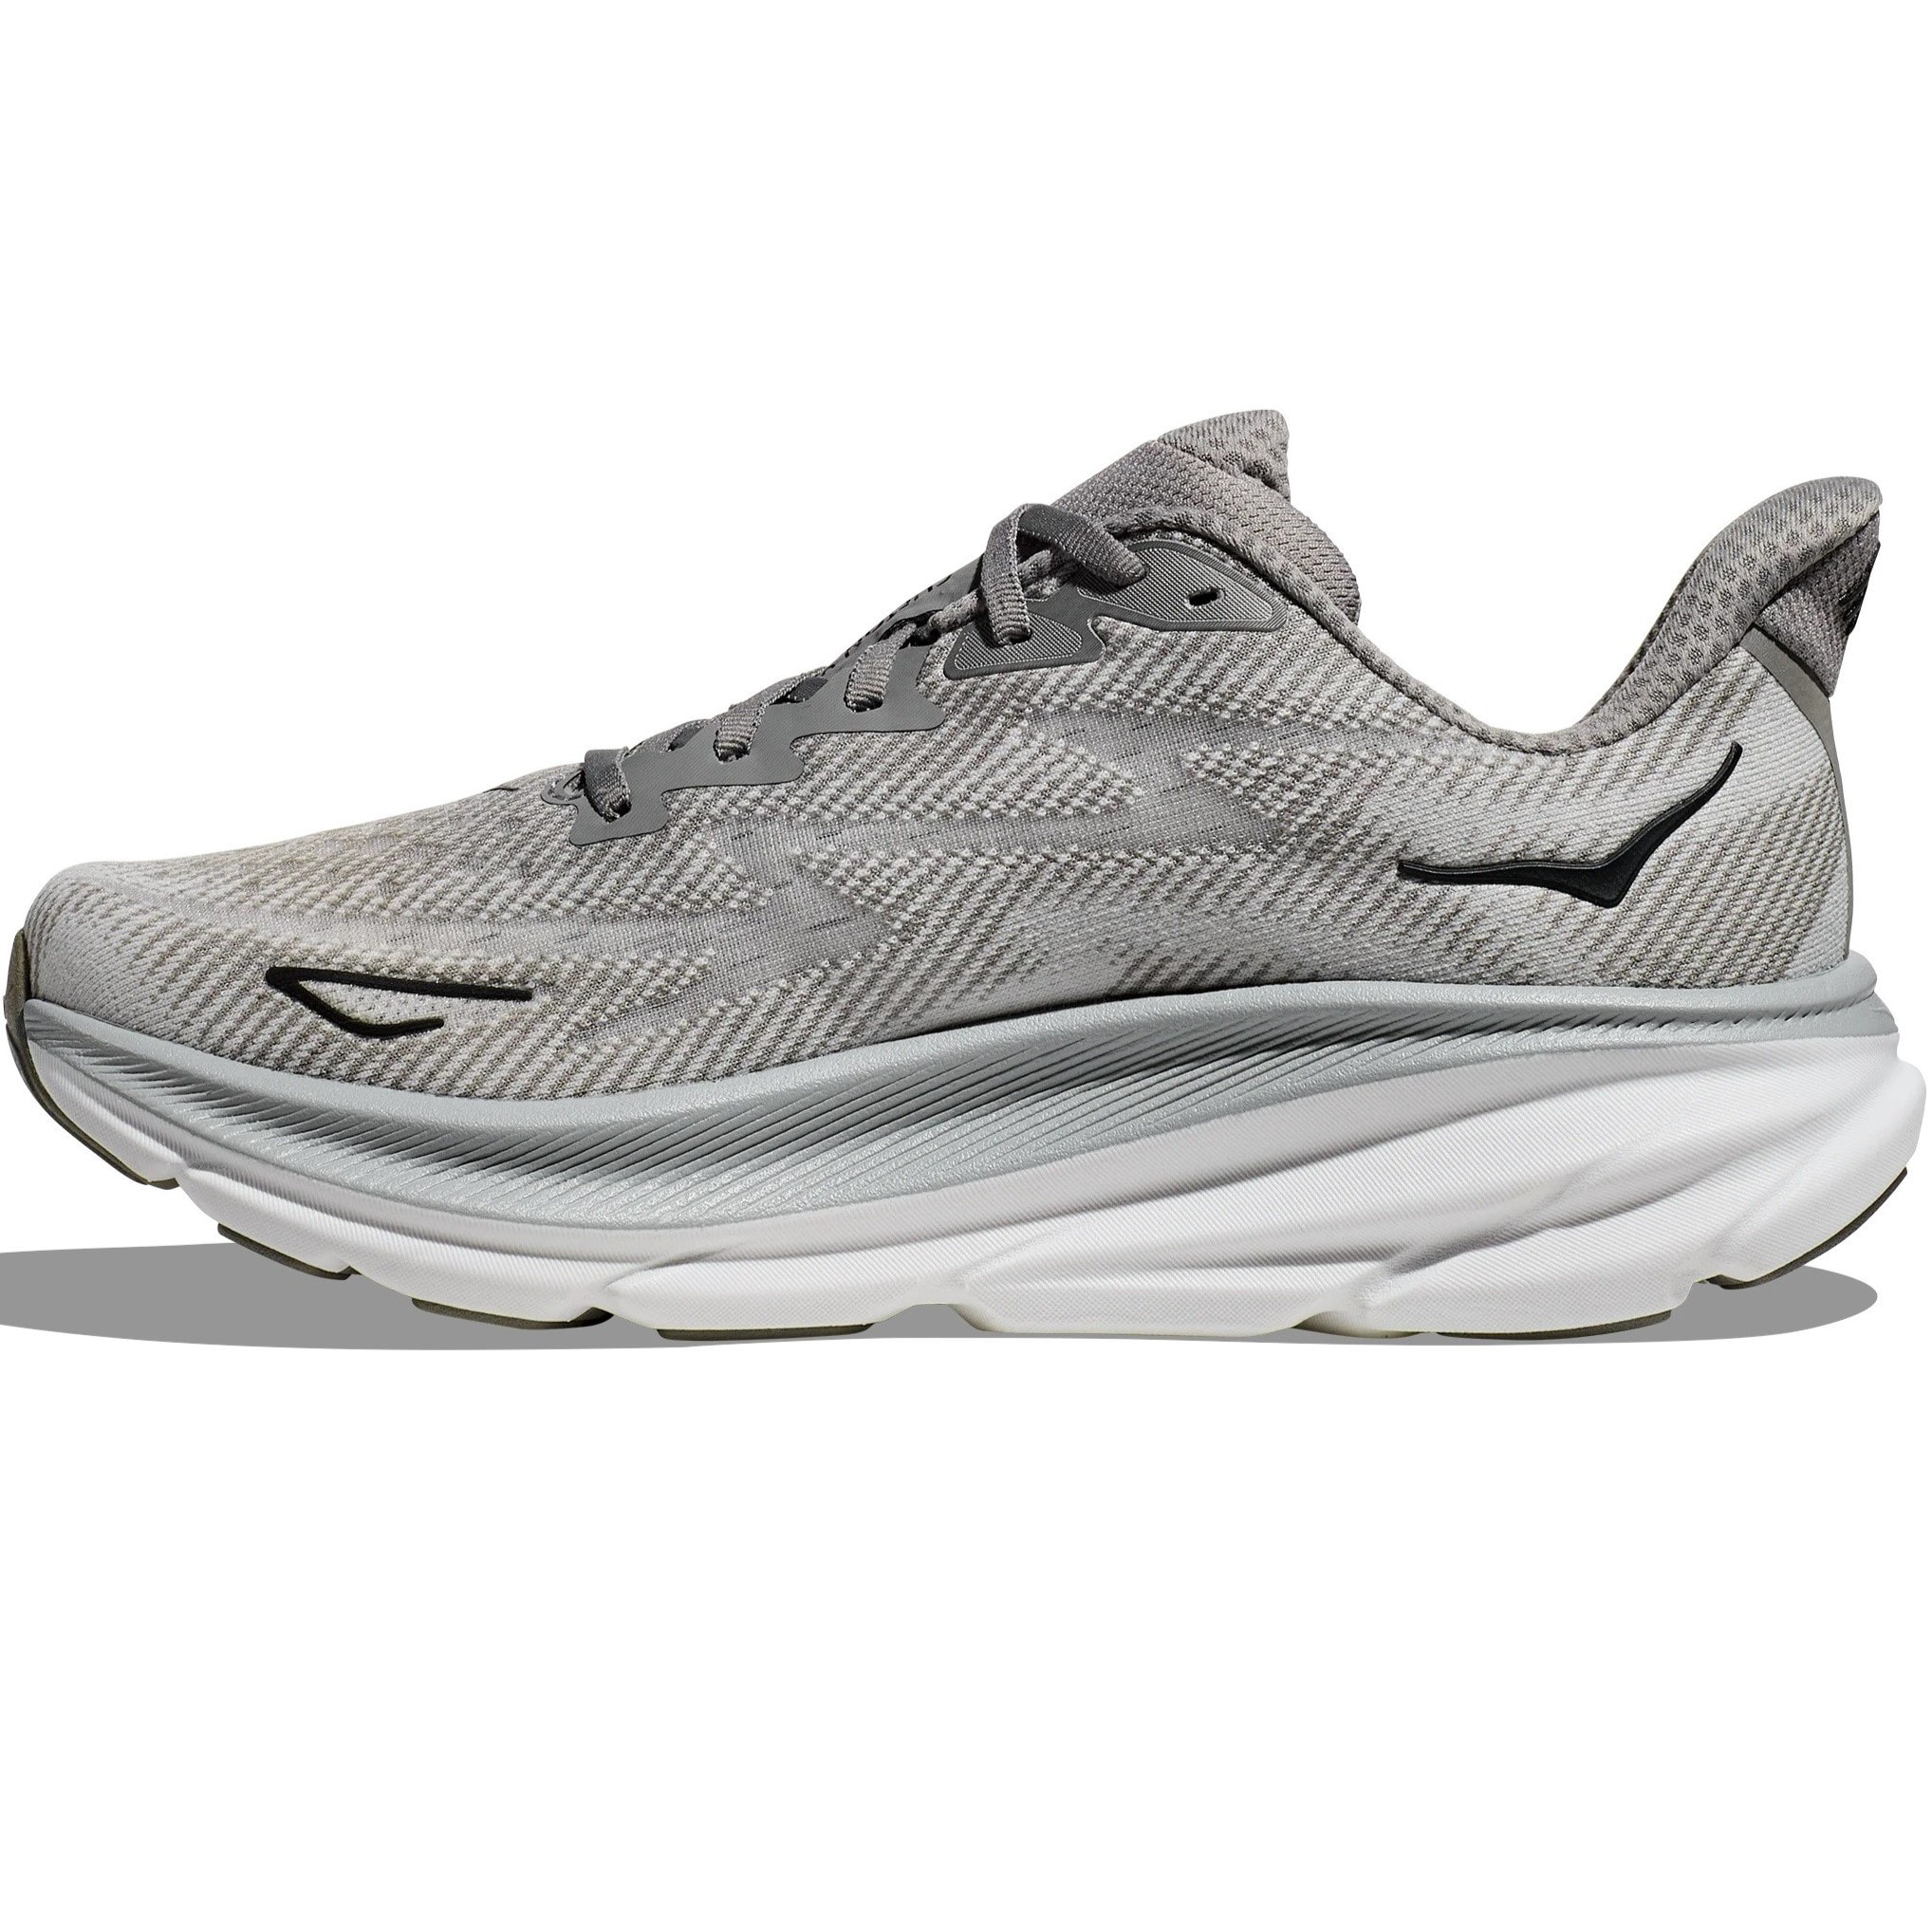 GIÀY THỂ THAO HOKA NAM HARBOR MIST CLIFTON 9 WIDE EVERYDAY RUNNING SHOES 196565186485 8